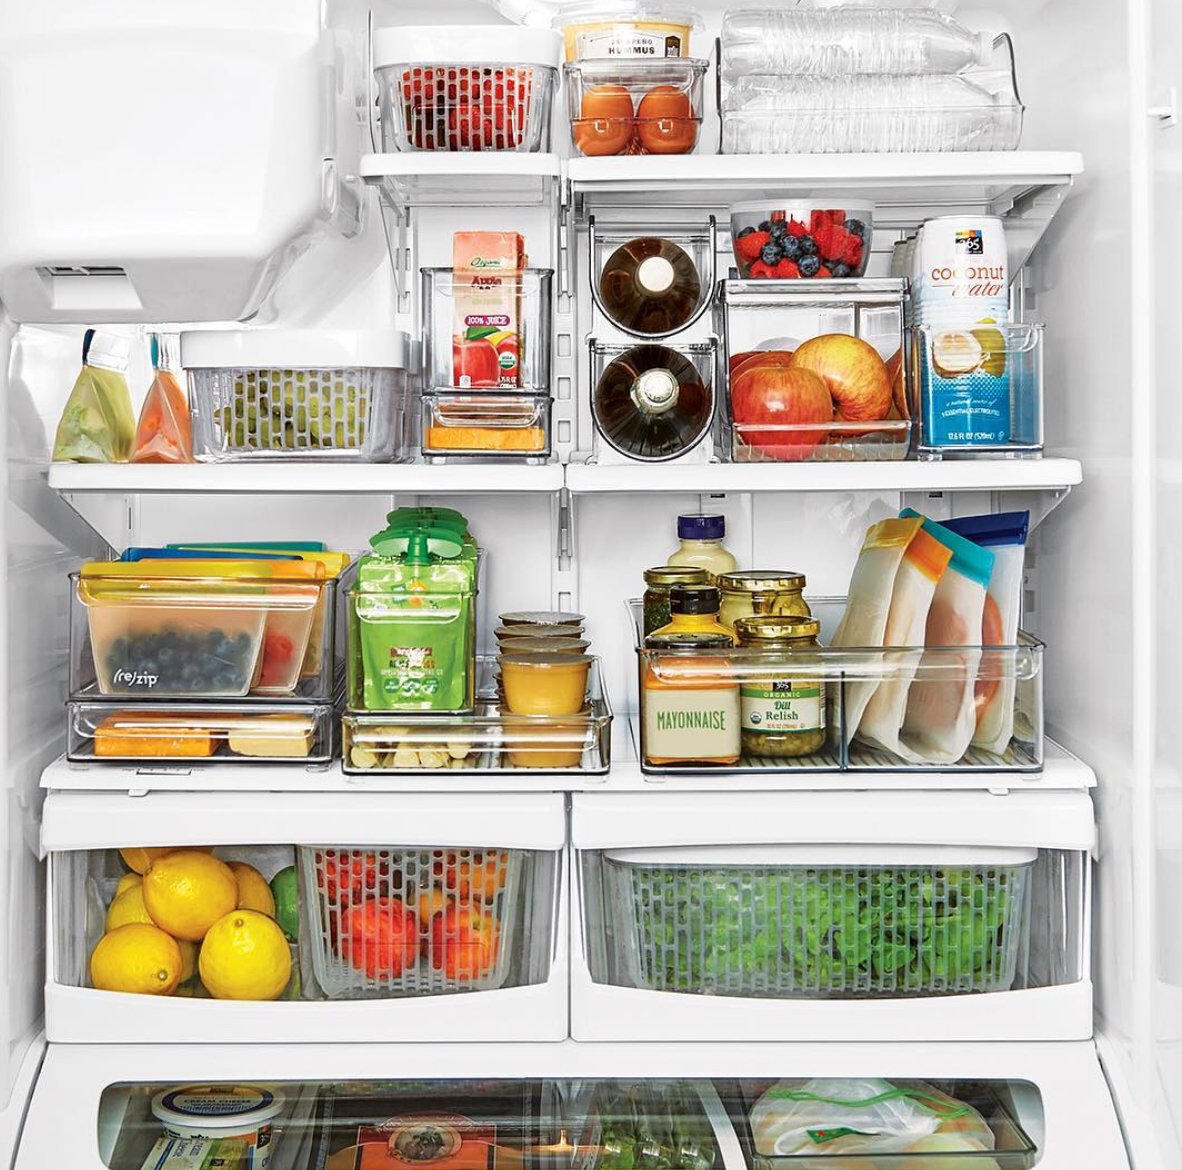 How to Organize the Fridge and Freezer - Clean and Scentsible